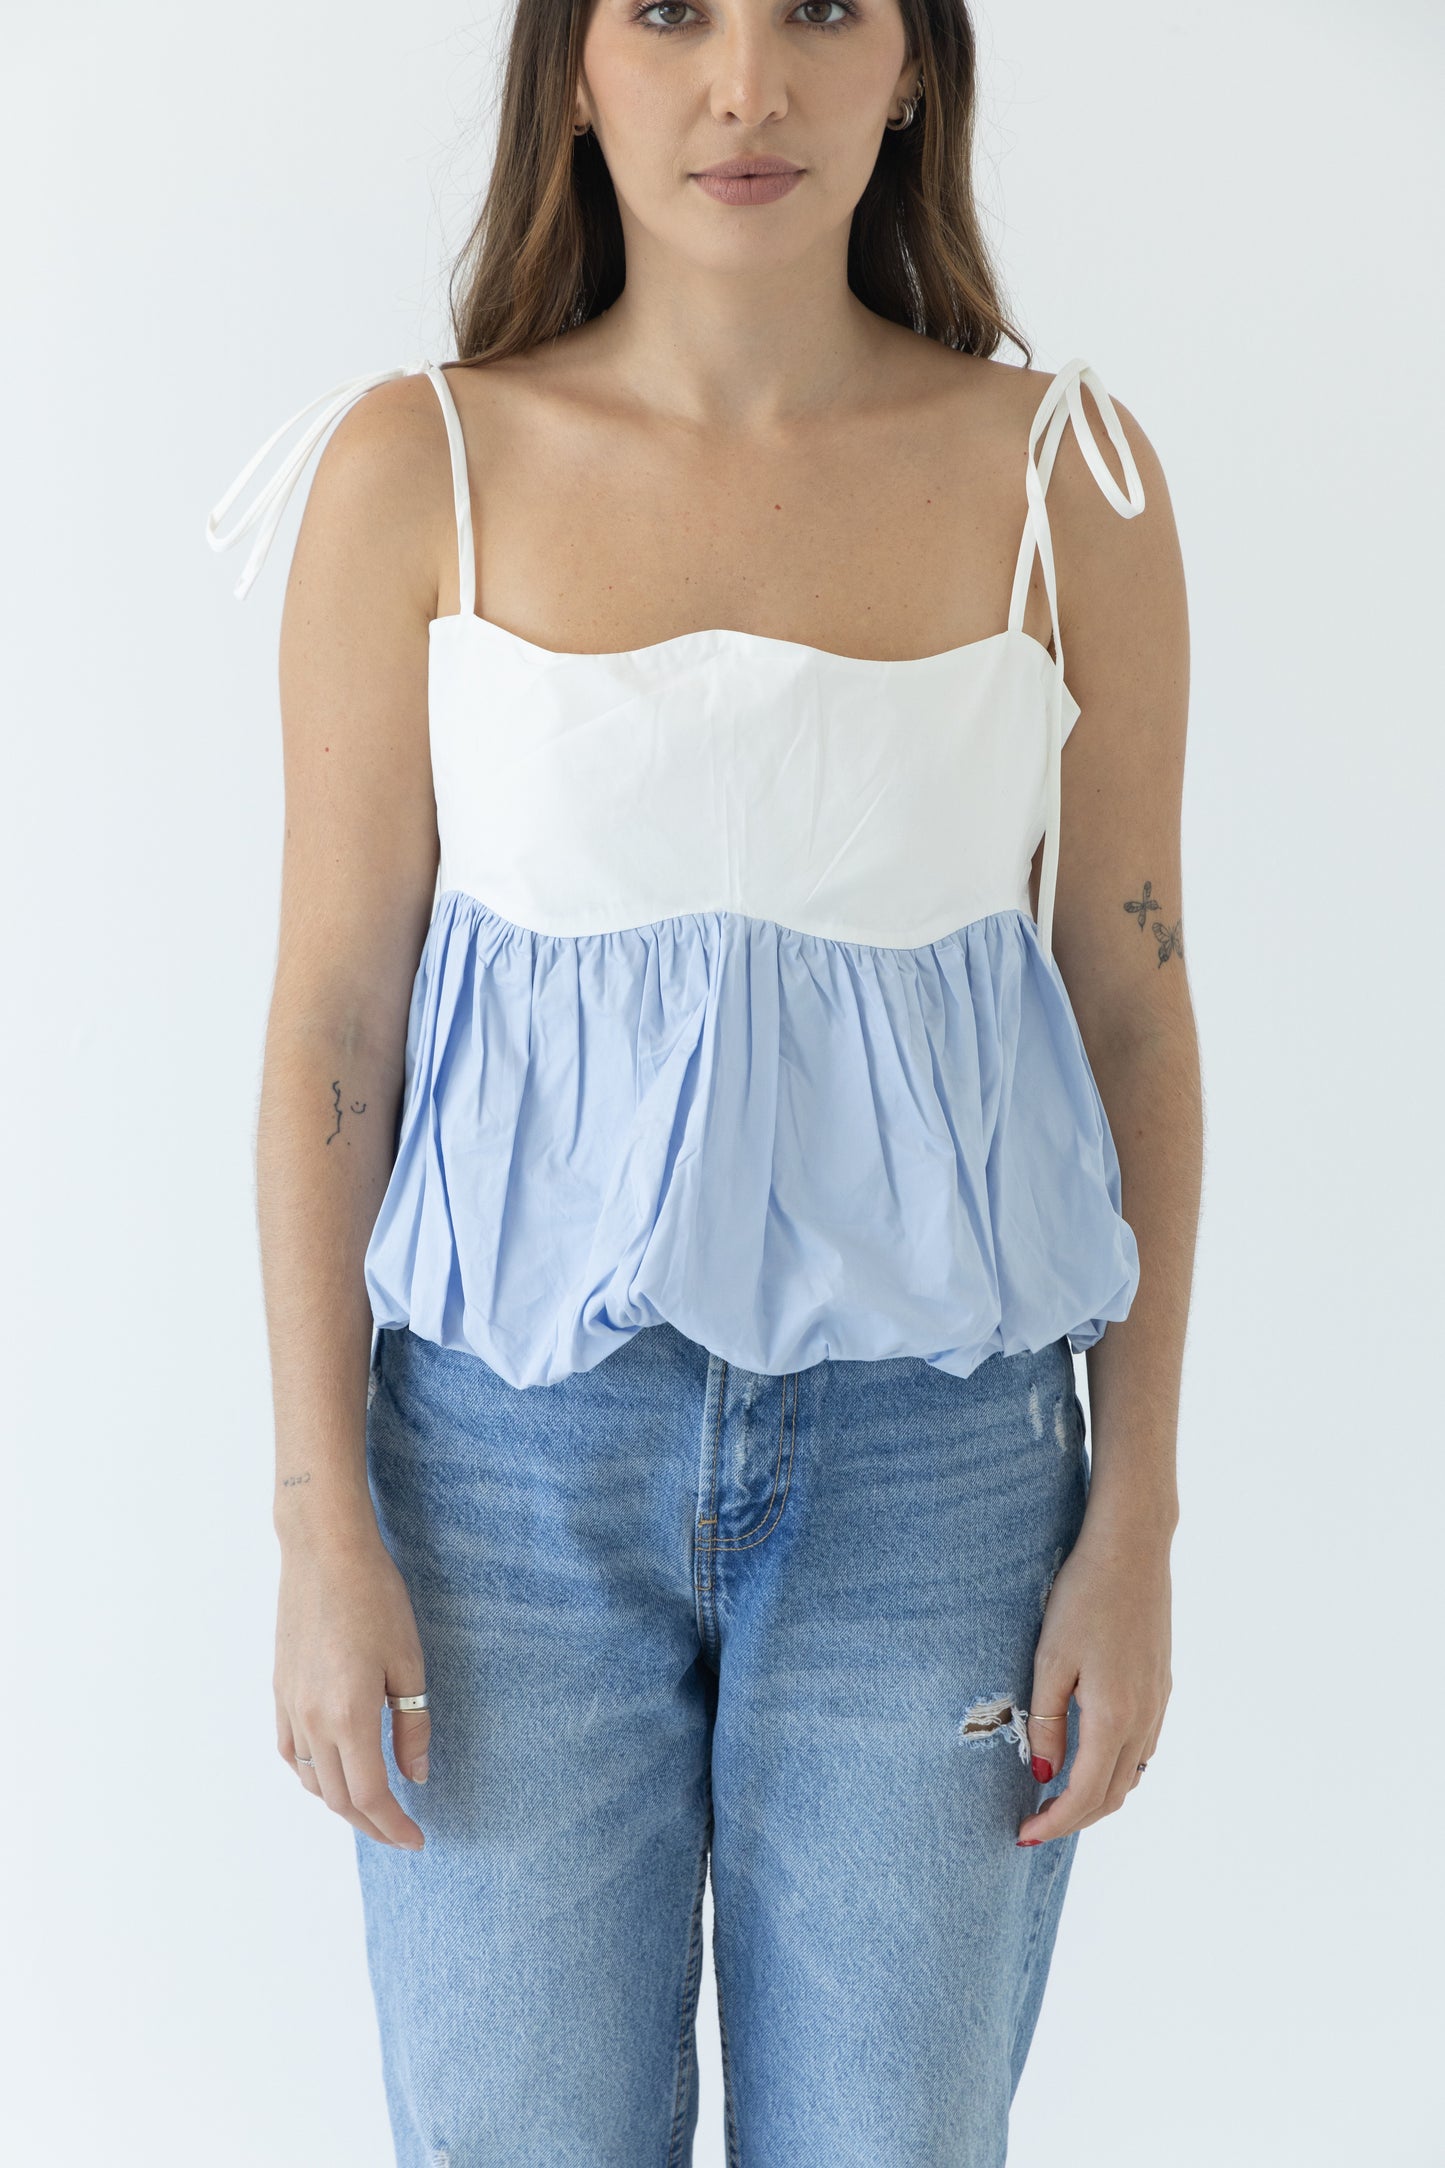 Cristy wave top